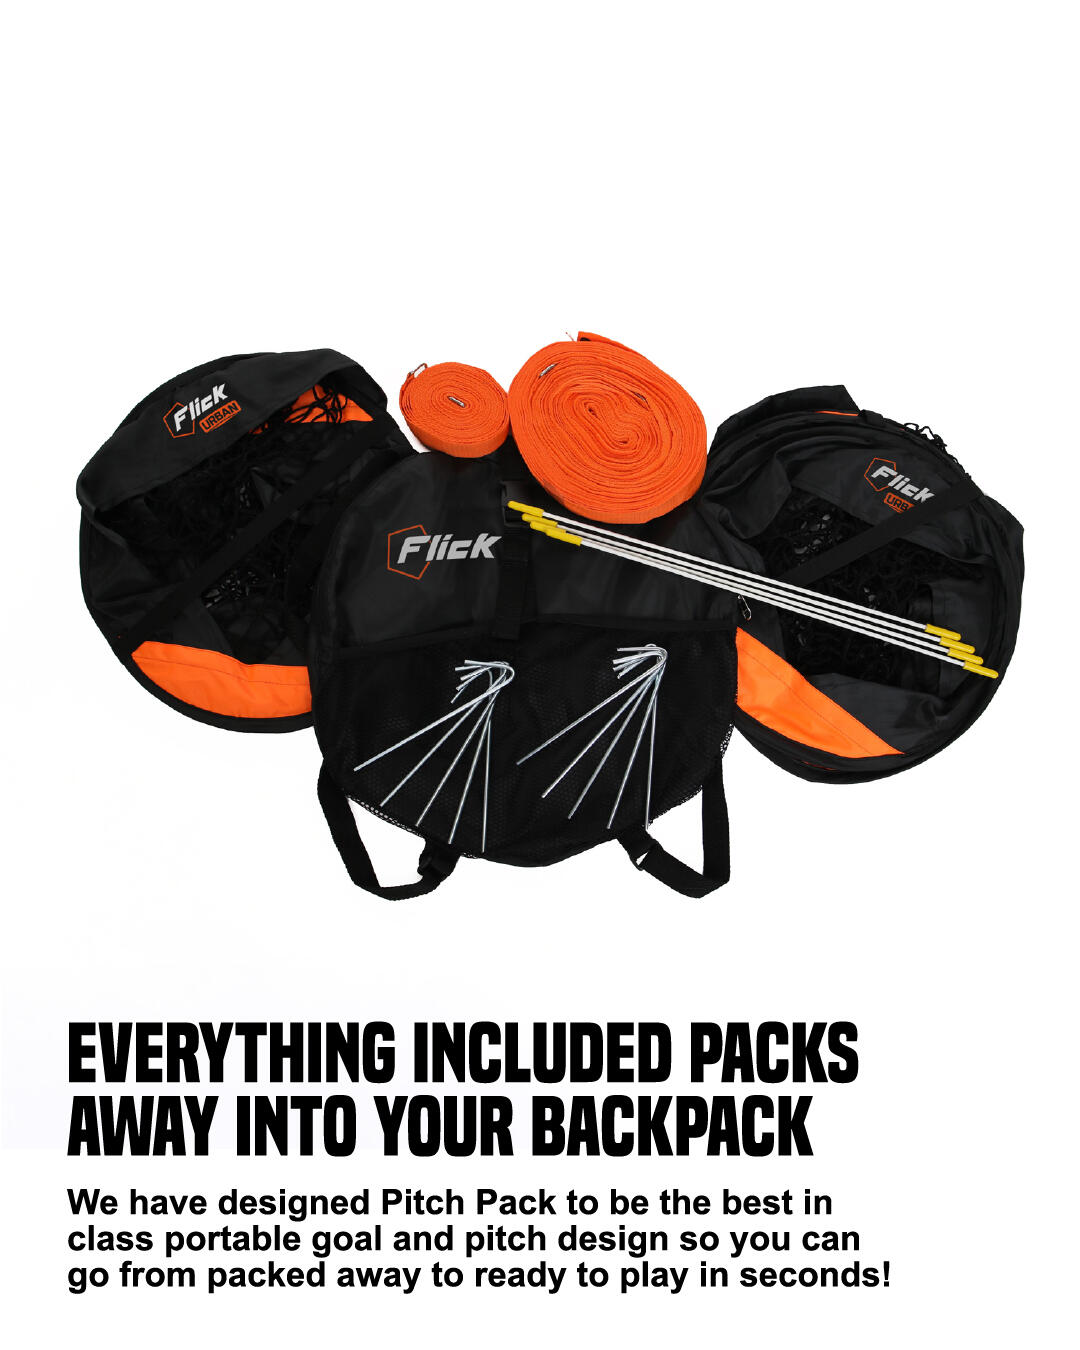 Football Flick Training Goals & Pitch Back Pack - Set Of 2 3/5